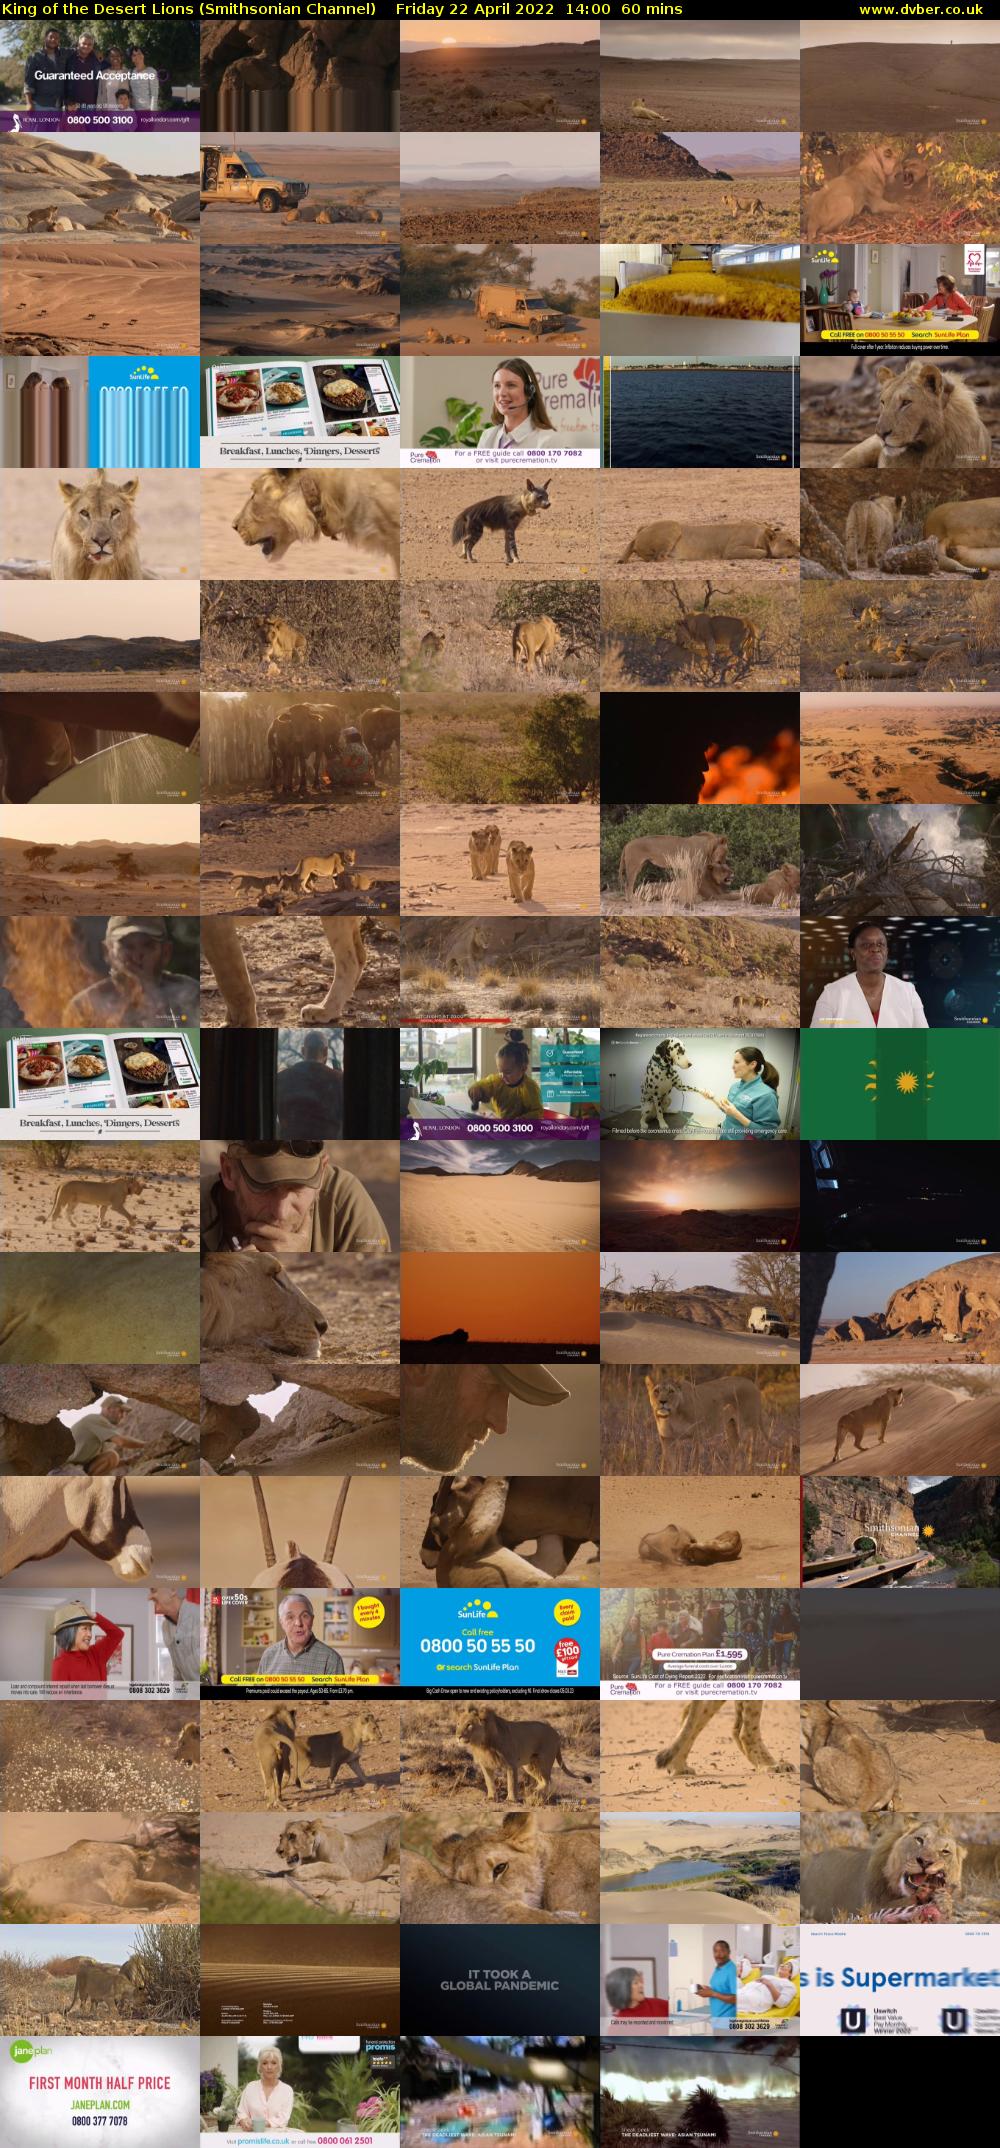 King of the Desert Lions (Smithsonian Channel) Friday 22 April 2022 14:00 - 15:00